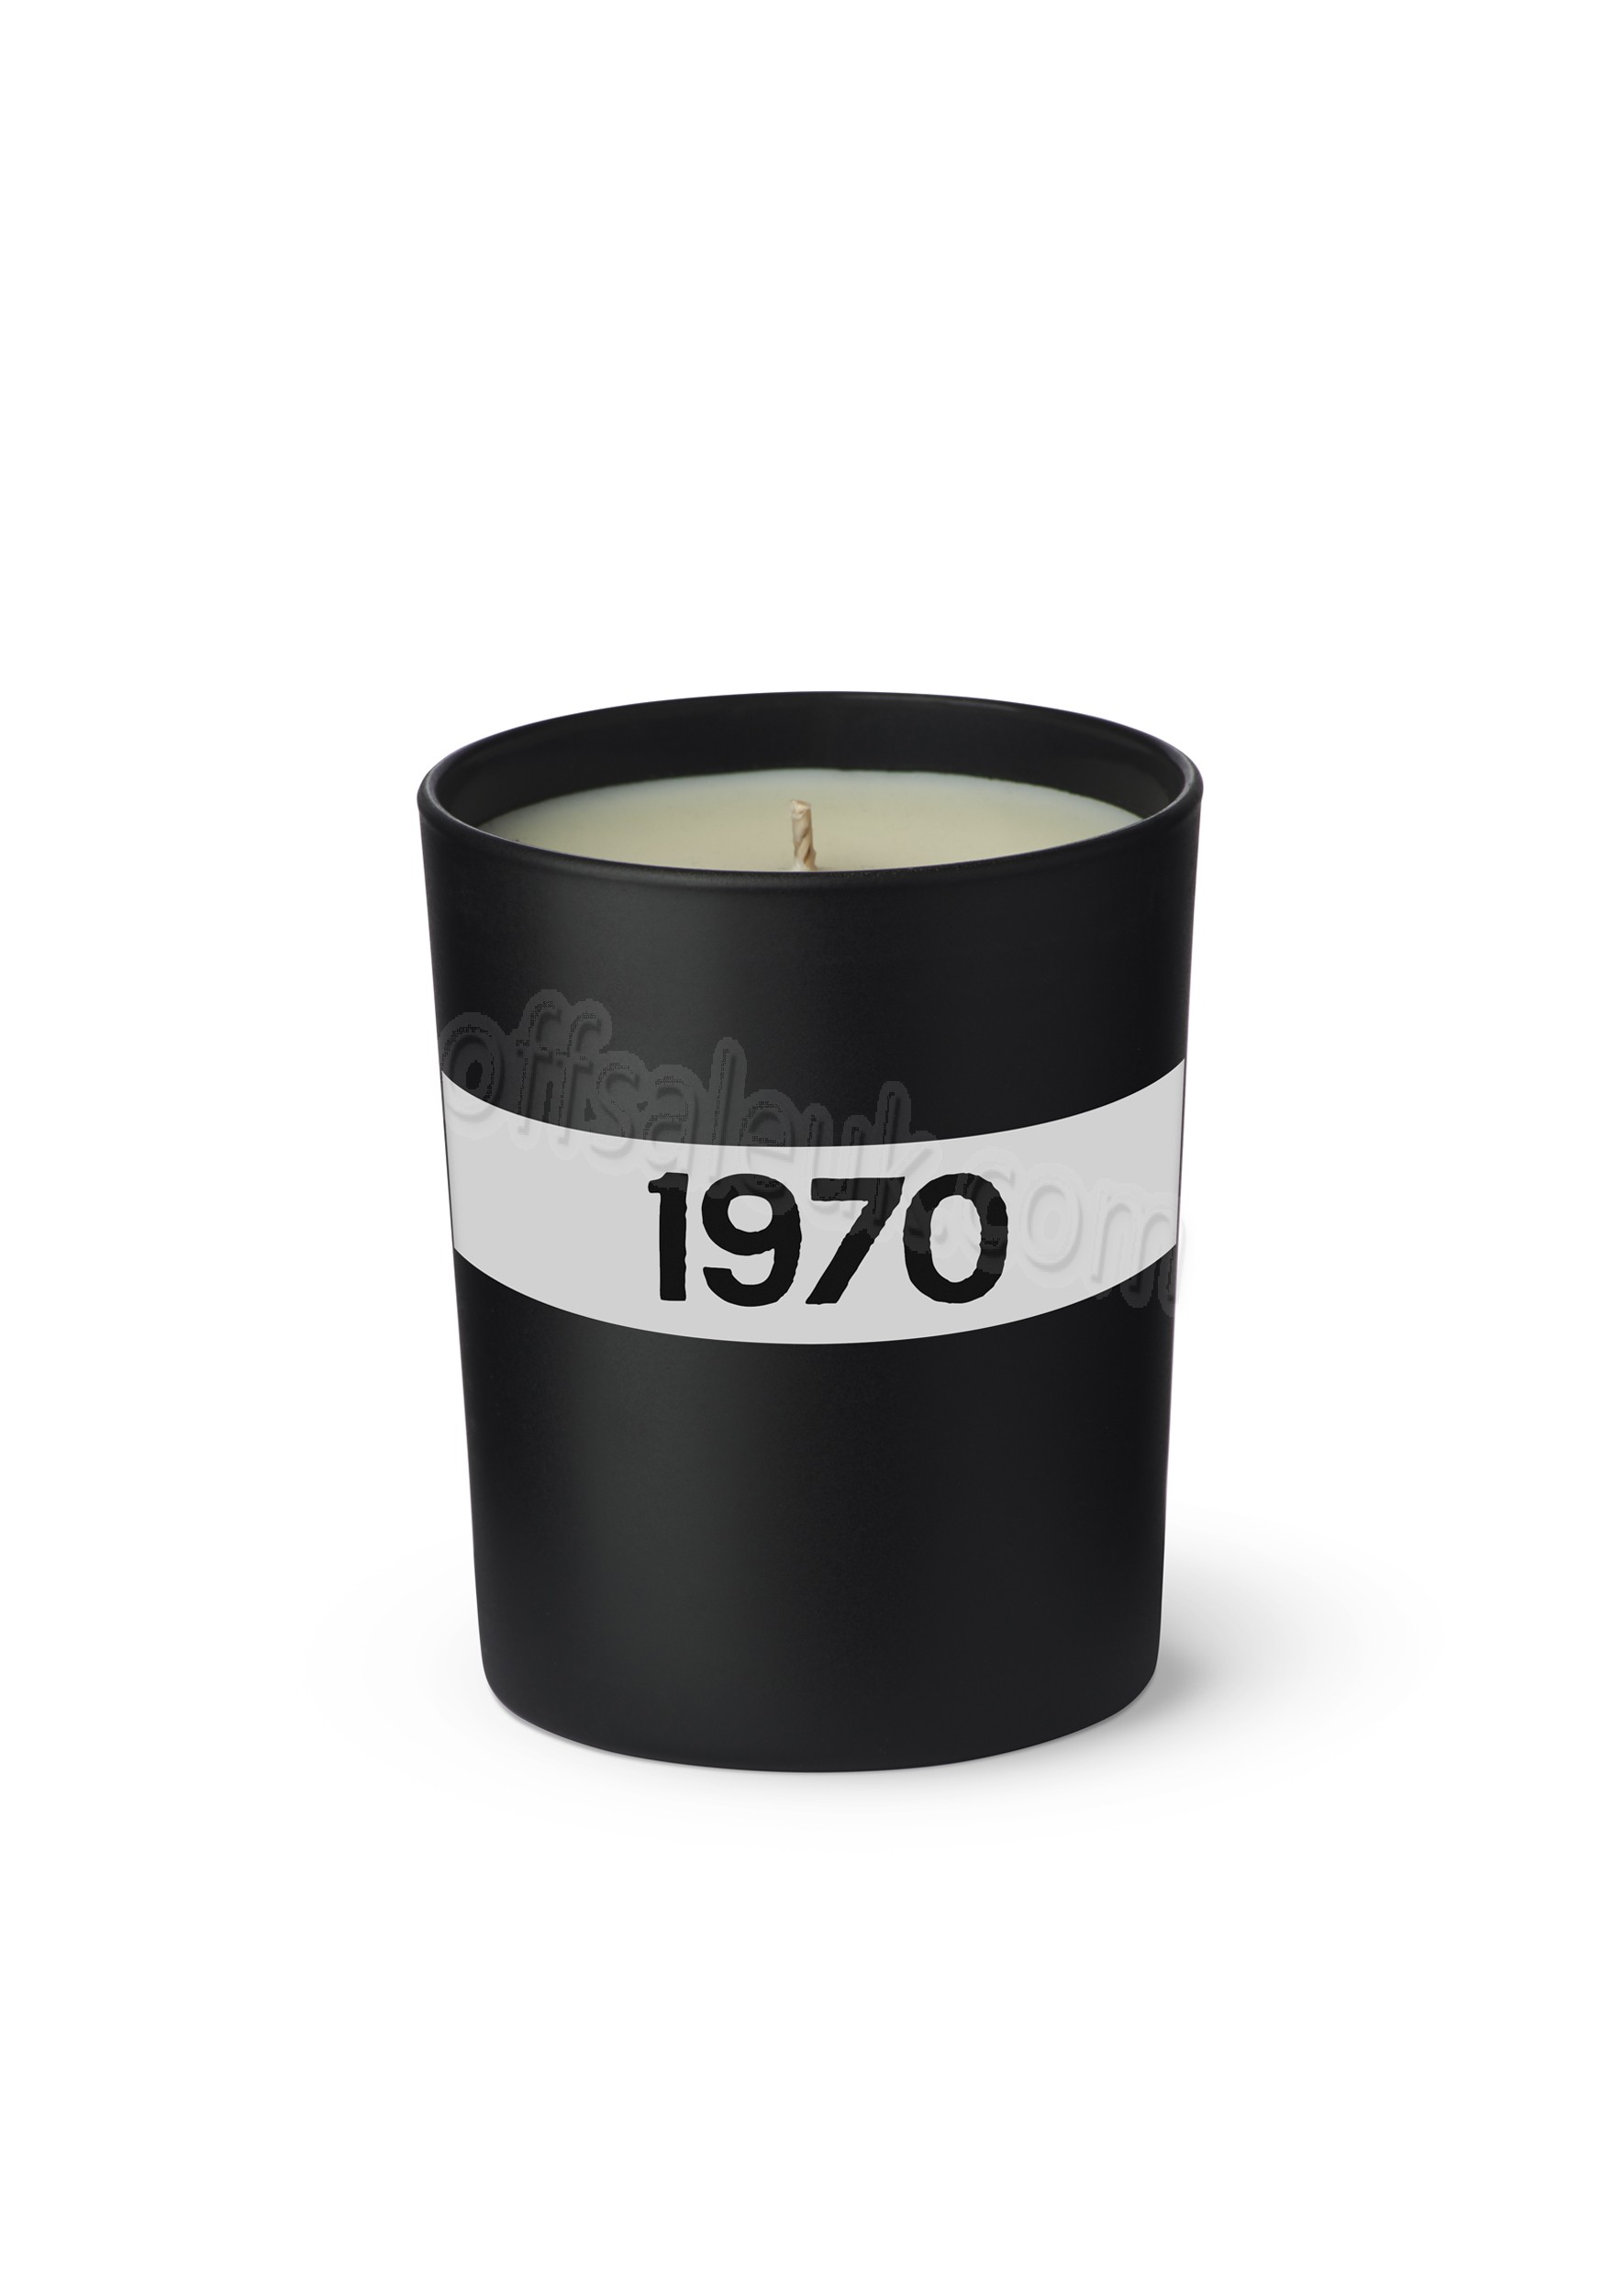 Cheap 1970 Candle - Cheap 1970 Candle